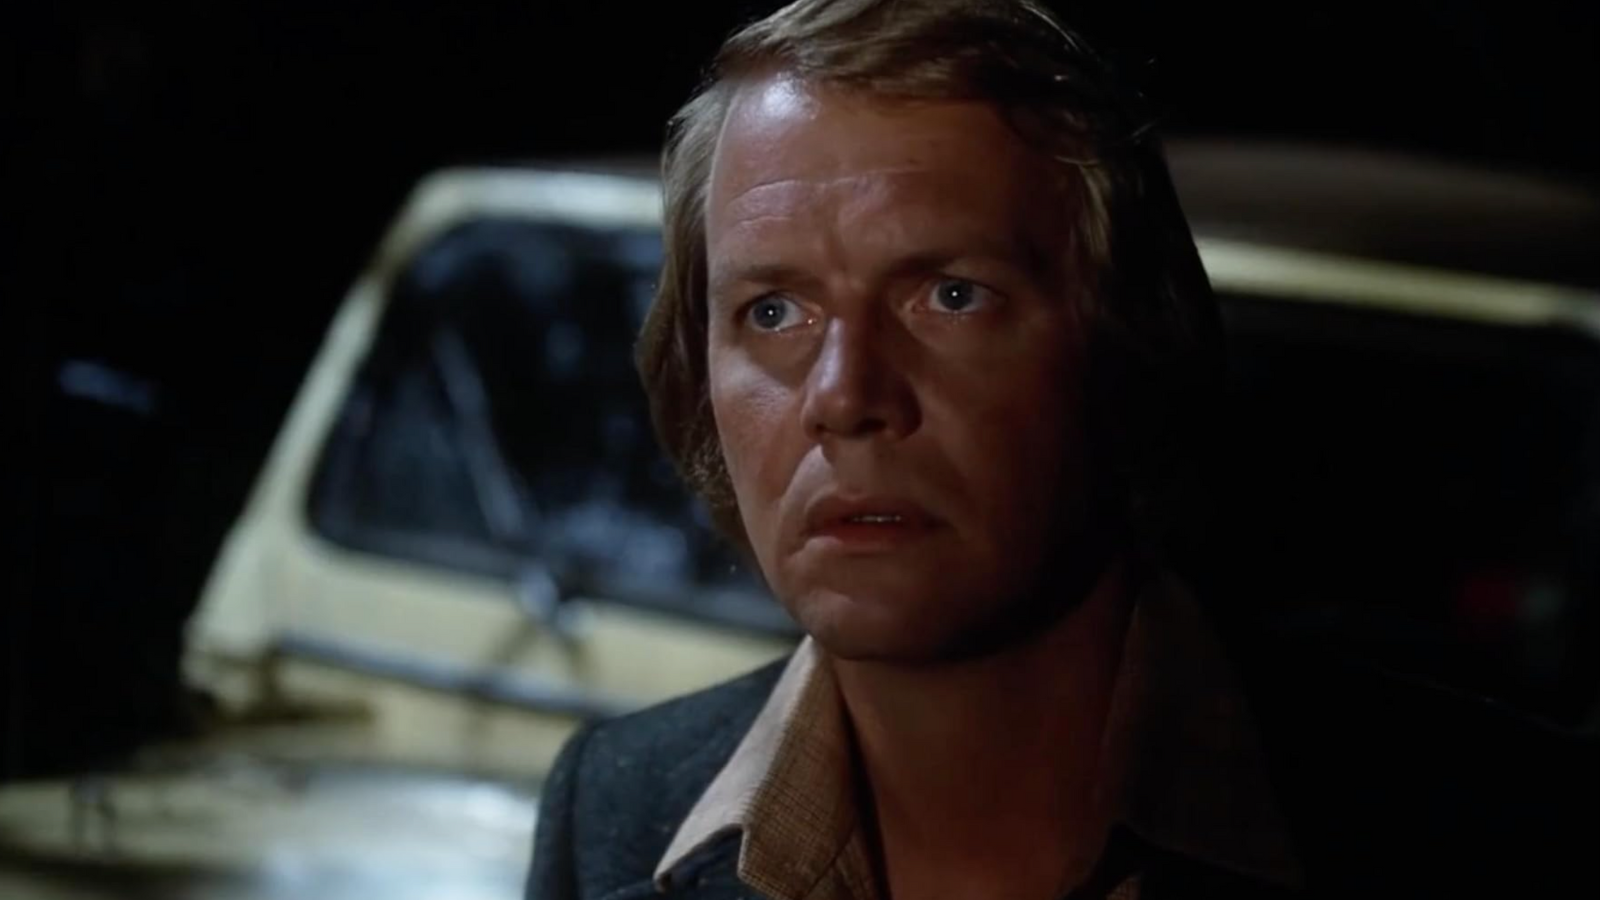 <p><span>Best known for his role as Hutch in <em>Starsky & Hutch</em>, David Soul passed away this January. The actor had a long battle with COPD, resulting in having a lung removed before losing his battle with cancer. David died in a London Hospital, surrounded by family and friends.</span></p><p><span>The family shared the following statement for his fans: “He shared many extraordinary gifts in the world as an actor, singer, storyteller, creative artist and dear friend. His smile, laughter and passion for life will be remembered by the many whose lives he has touched.”</span></p>